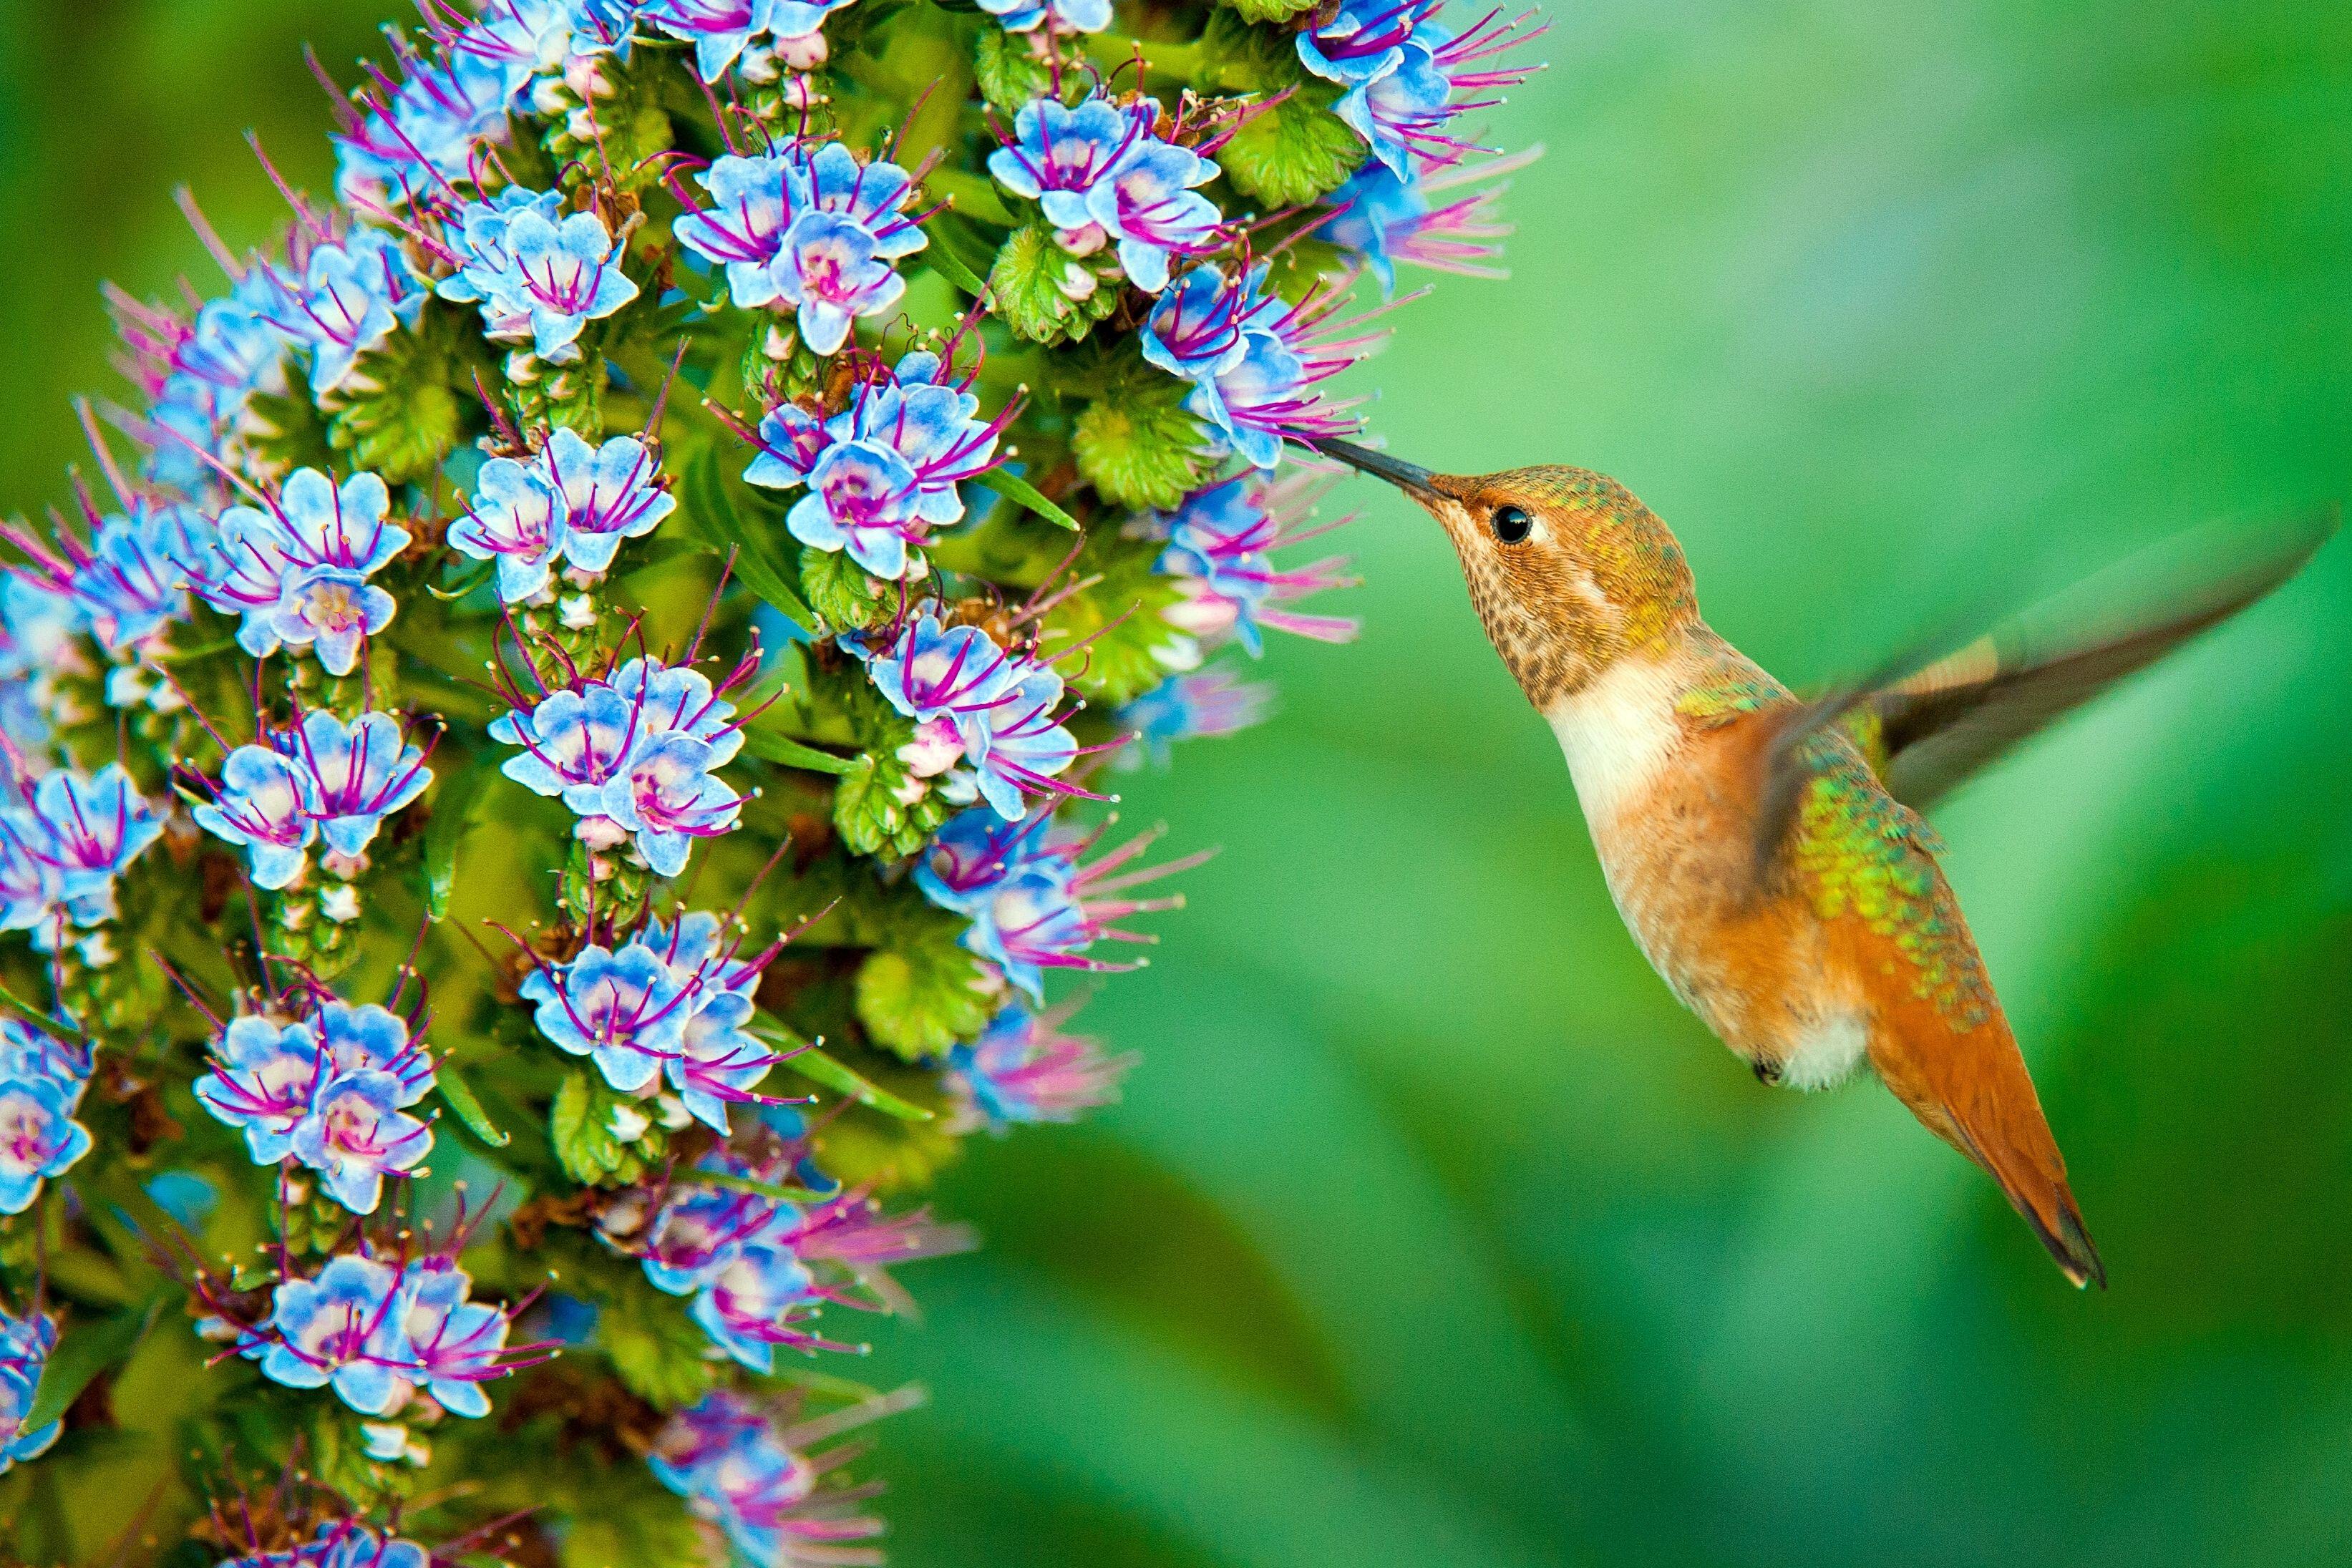 Desktop Wallpaper Flight Wings Hummingbird Colorful Hd Image Picture  Background A8d574